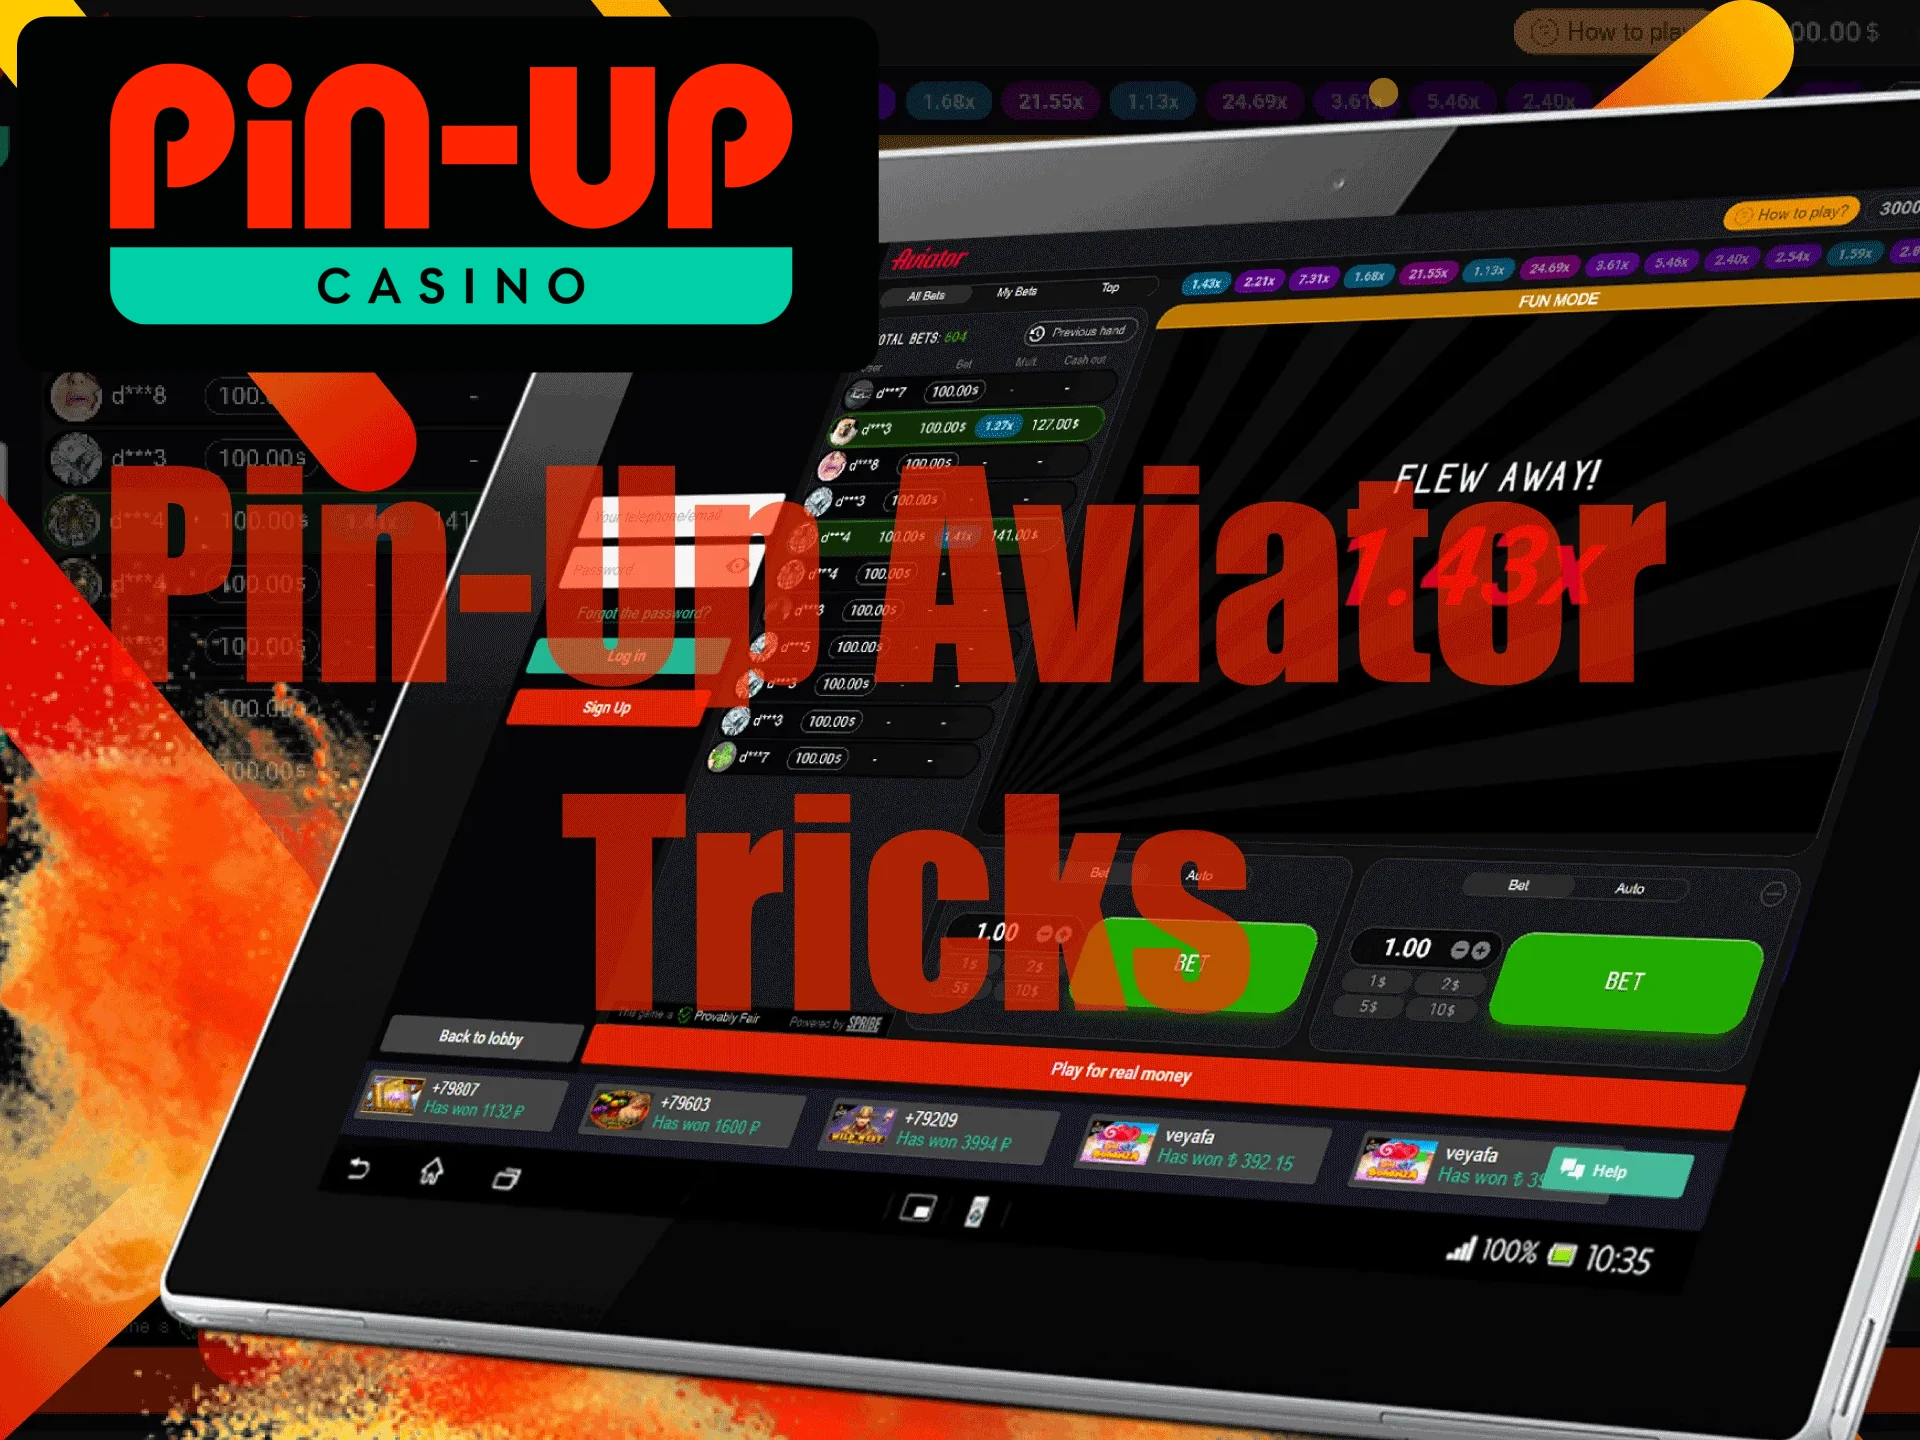 Use our tricks and win more and easier in the Aviator game.